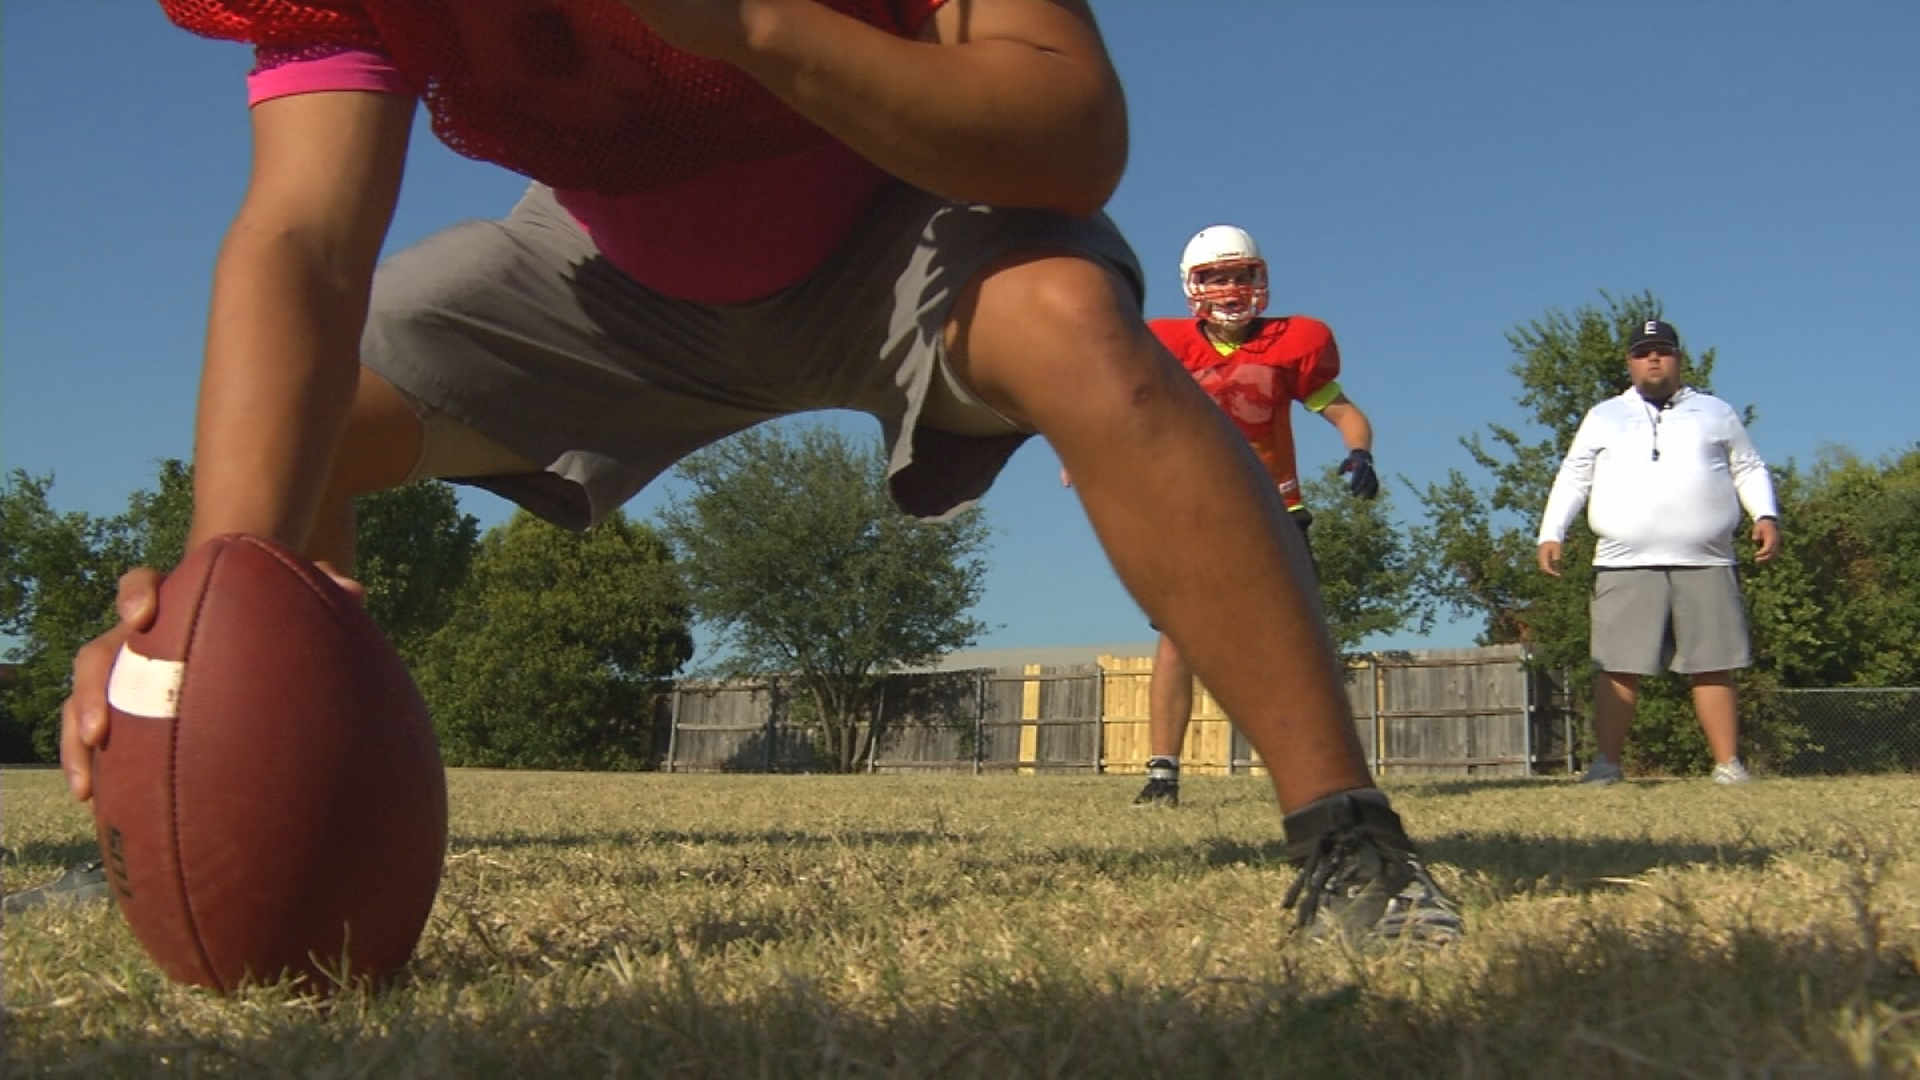 After getting its plan out earlier than expected, Texas private schools know their plan for fall sports as all eyes turn toward the UIL.